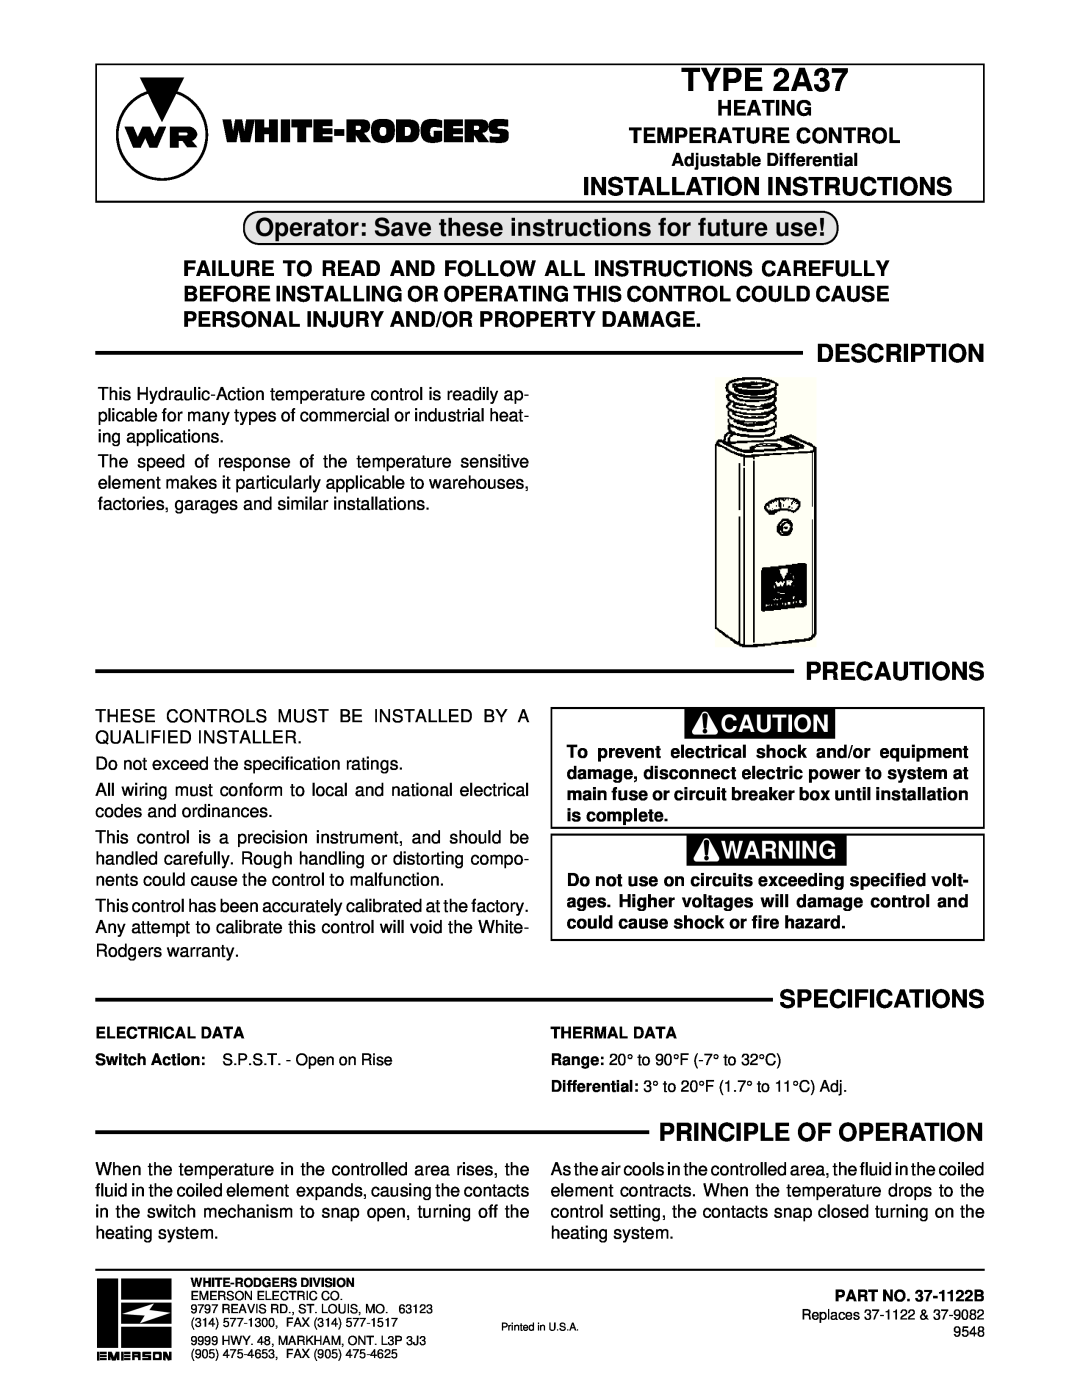 White Rodgers installation instructions TYPE 2A37, White-Rodgers, Installation Instructions, Description, Precautions 